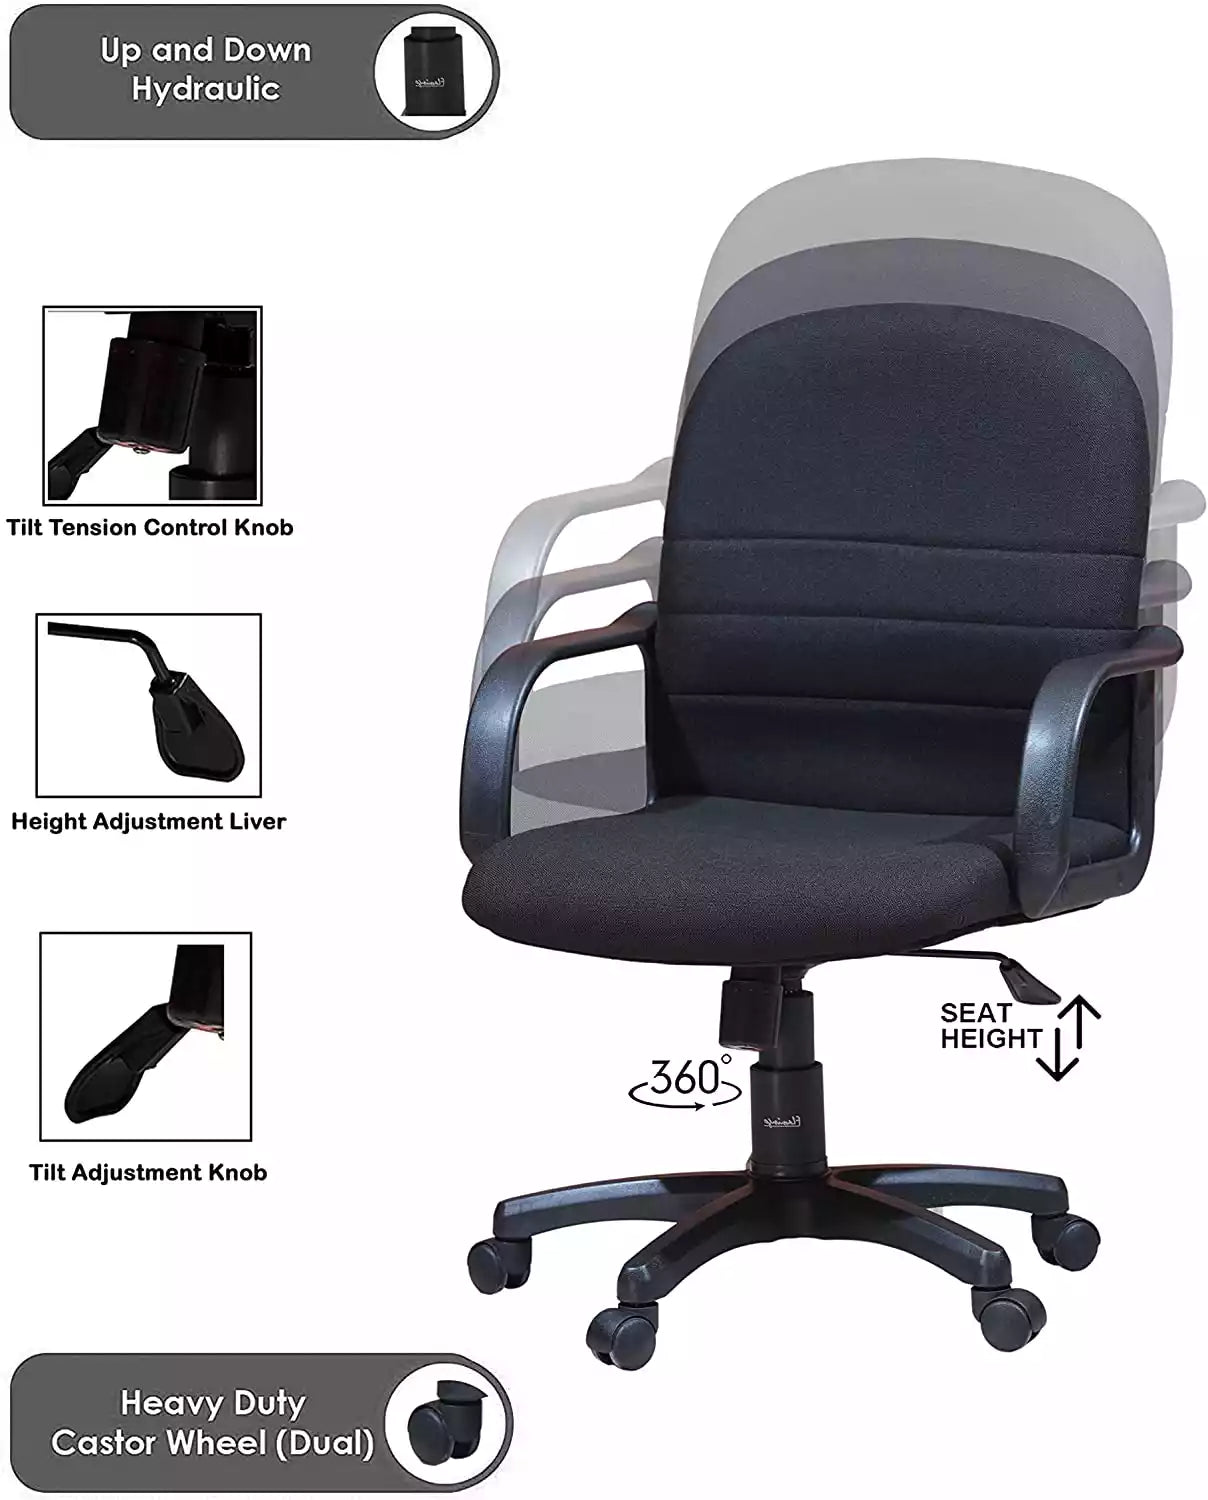 Napoli Office Chair Adjustable Height & Lumbar Support, Black